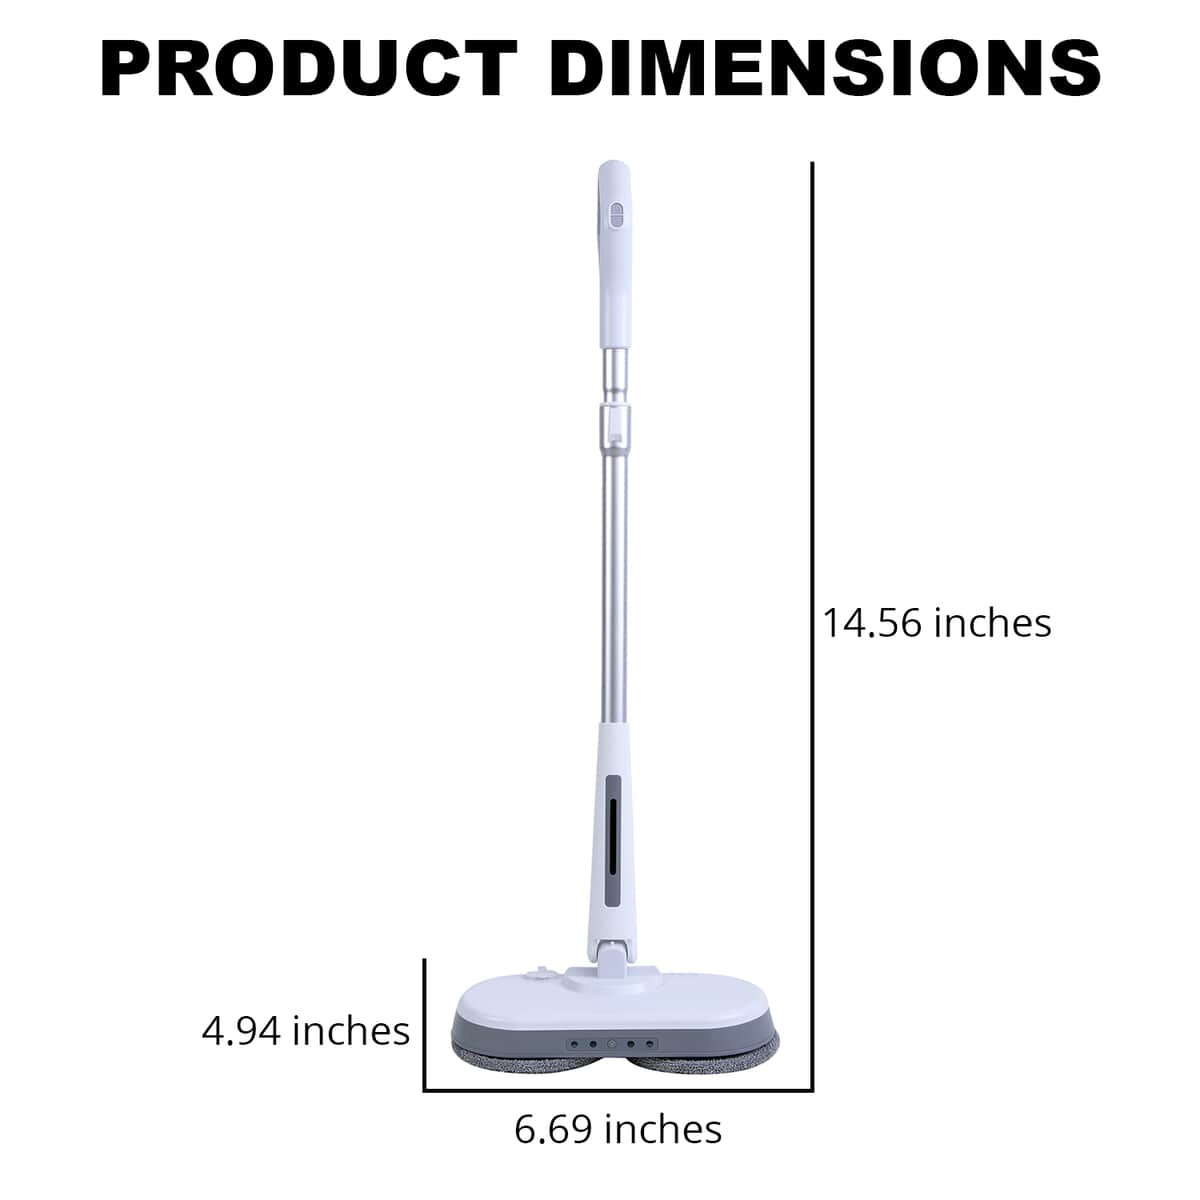 Homesmart White and Gray Cordless Electric Spin Mop with 280ml Water Tank and Built-in 4 LED Light image number 3